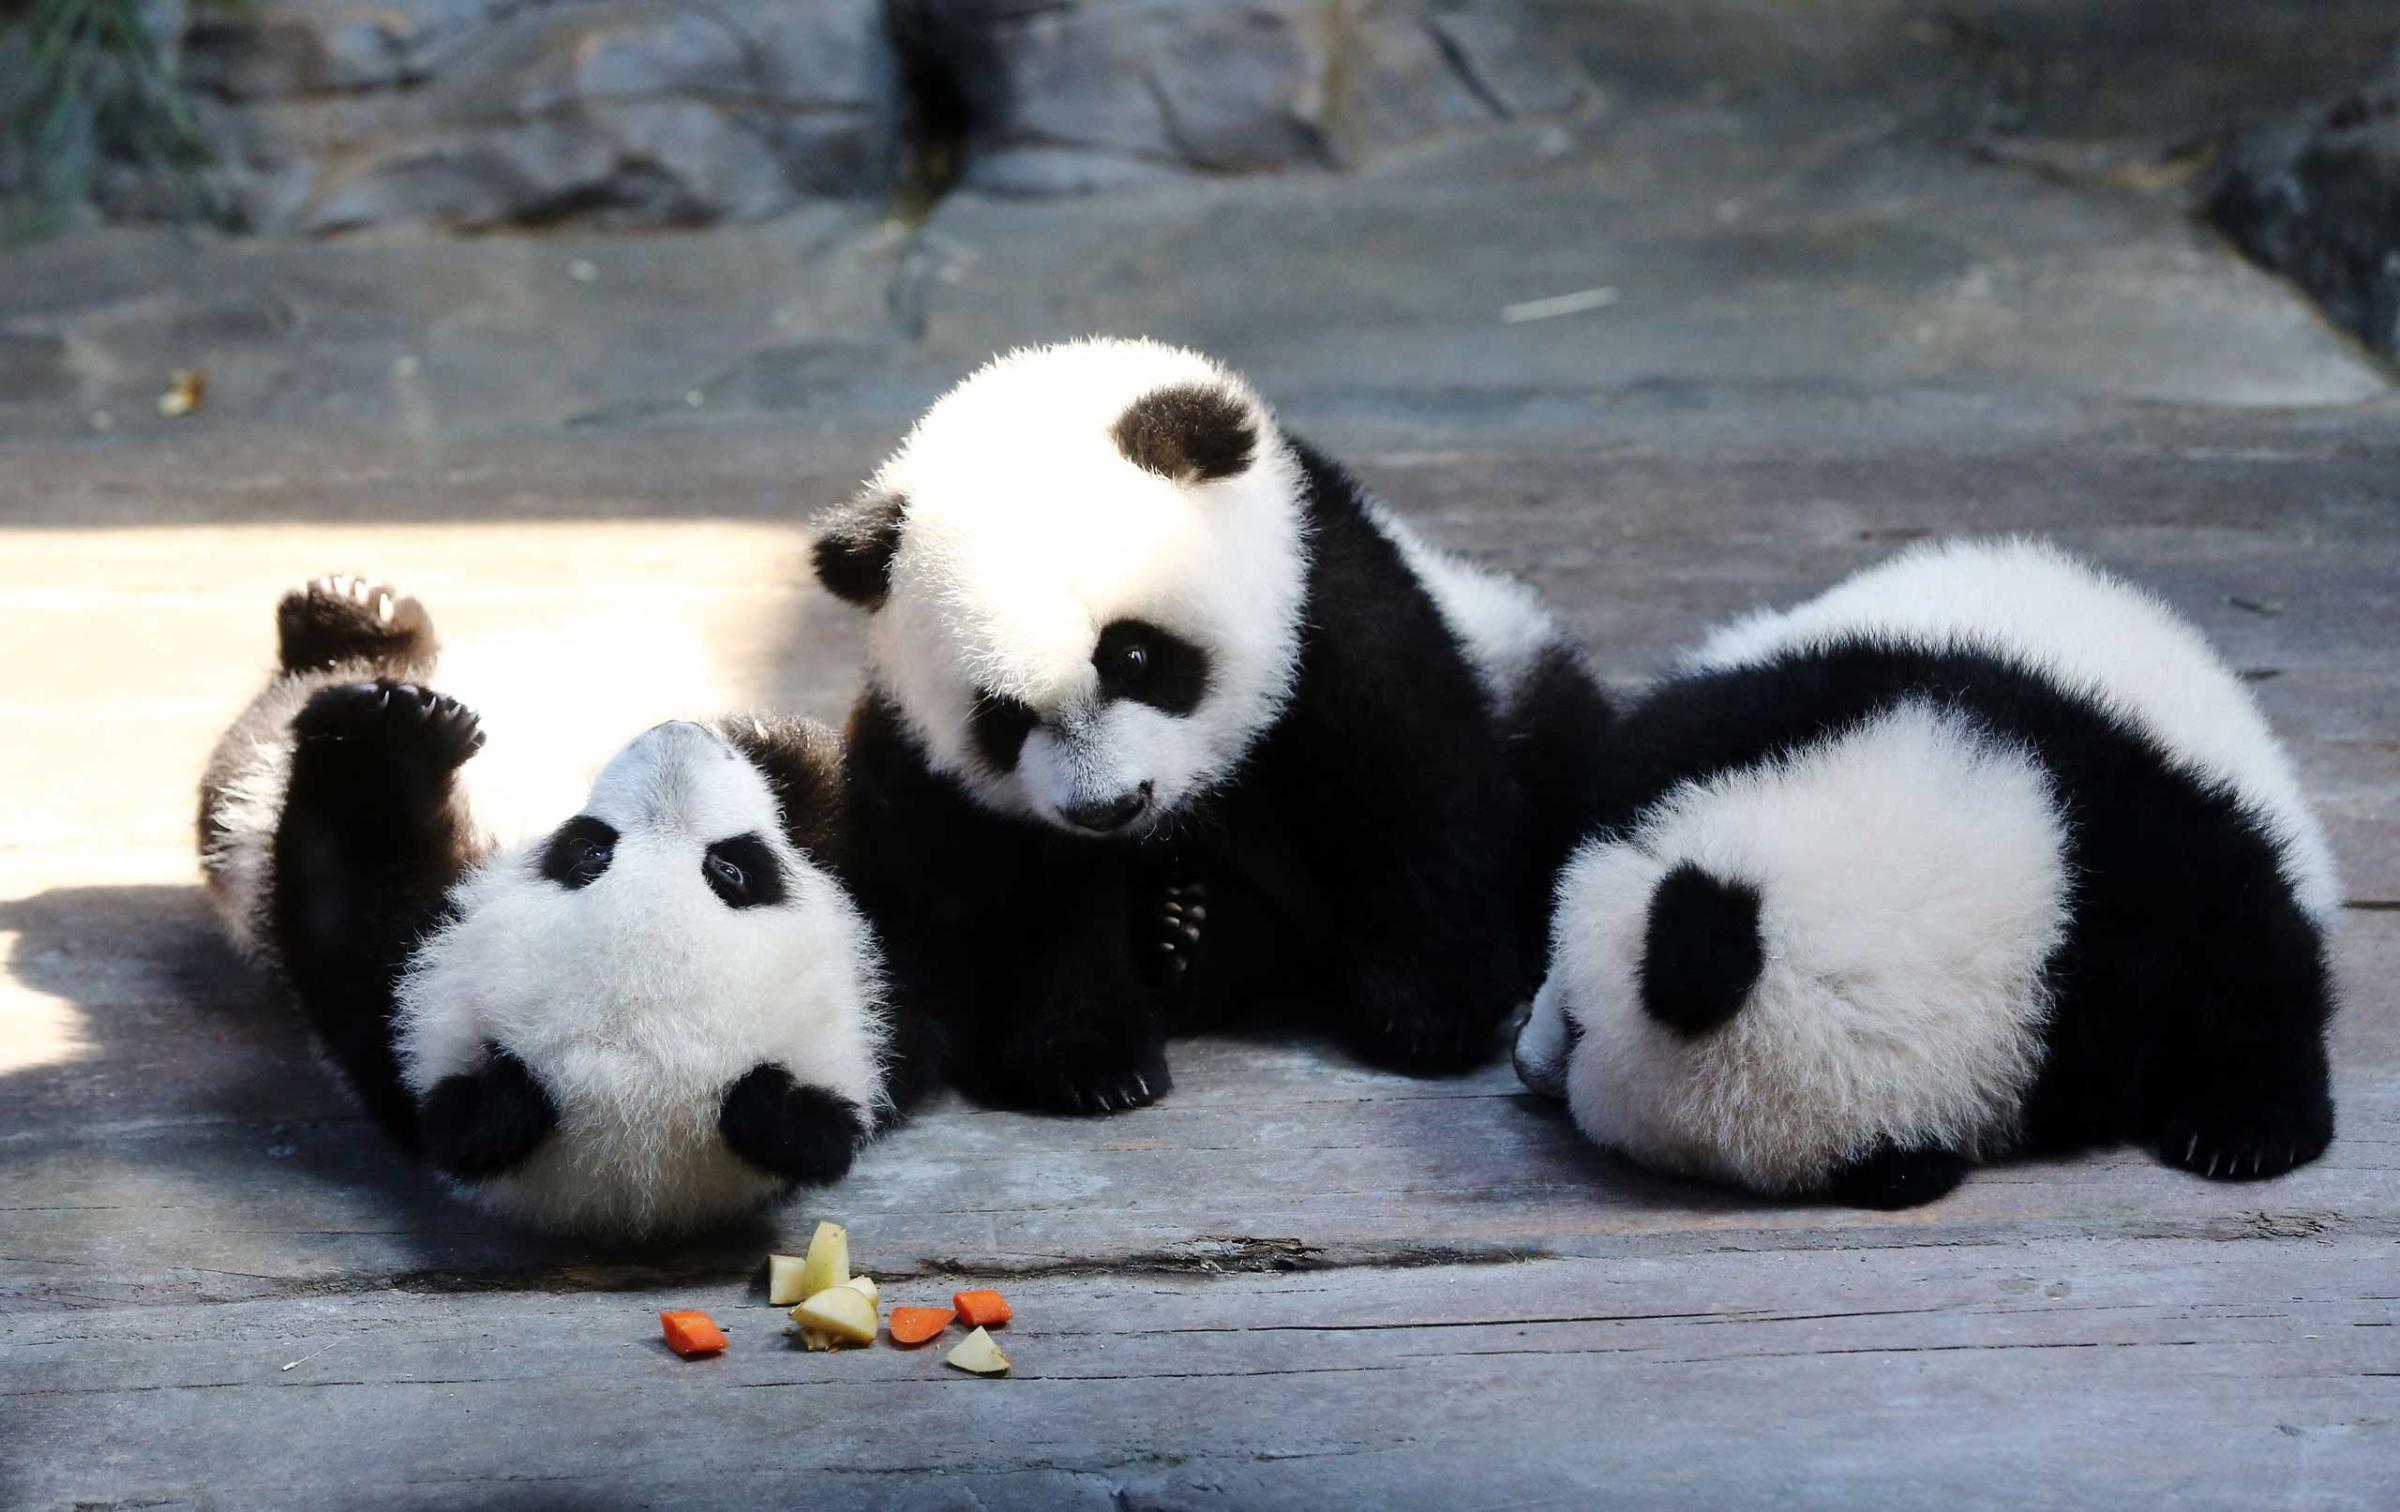 BESTPIX World's Only Alive Panda Triplets Start Living Together With Their Mother